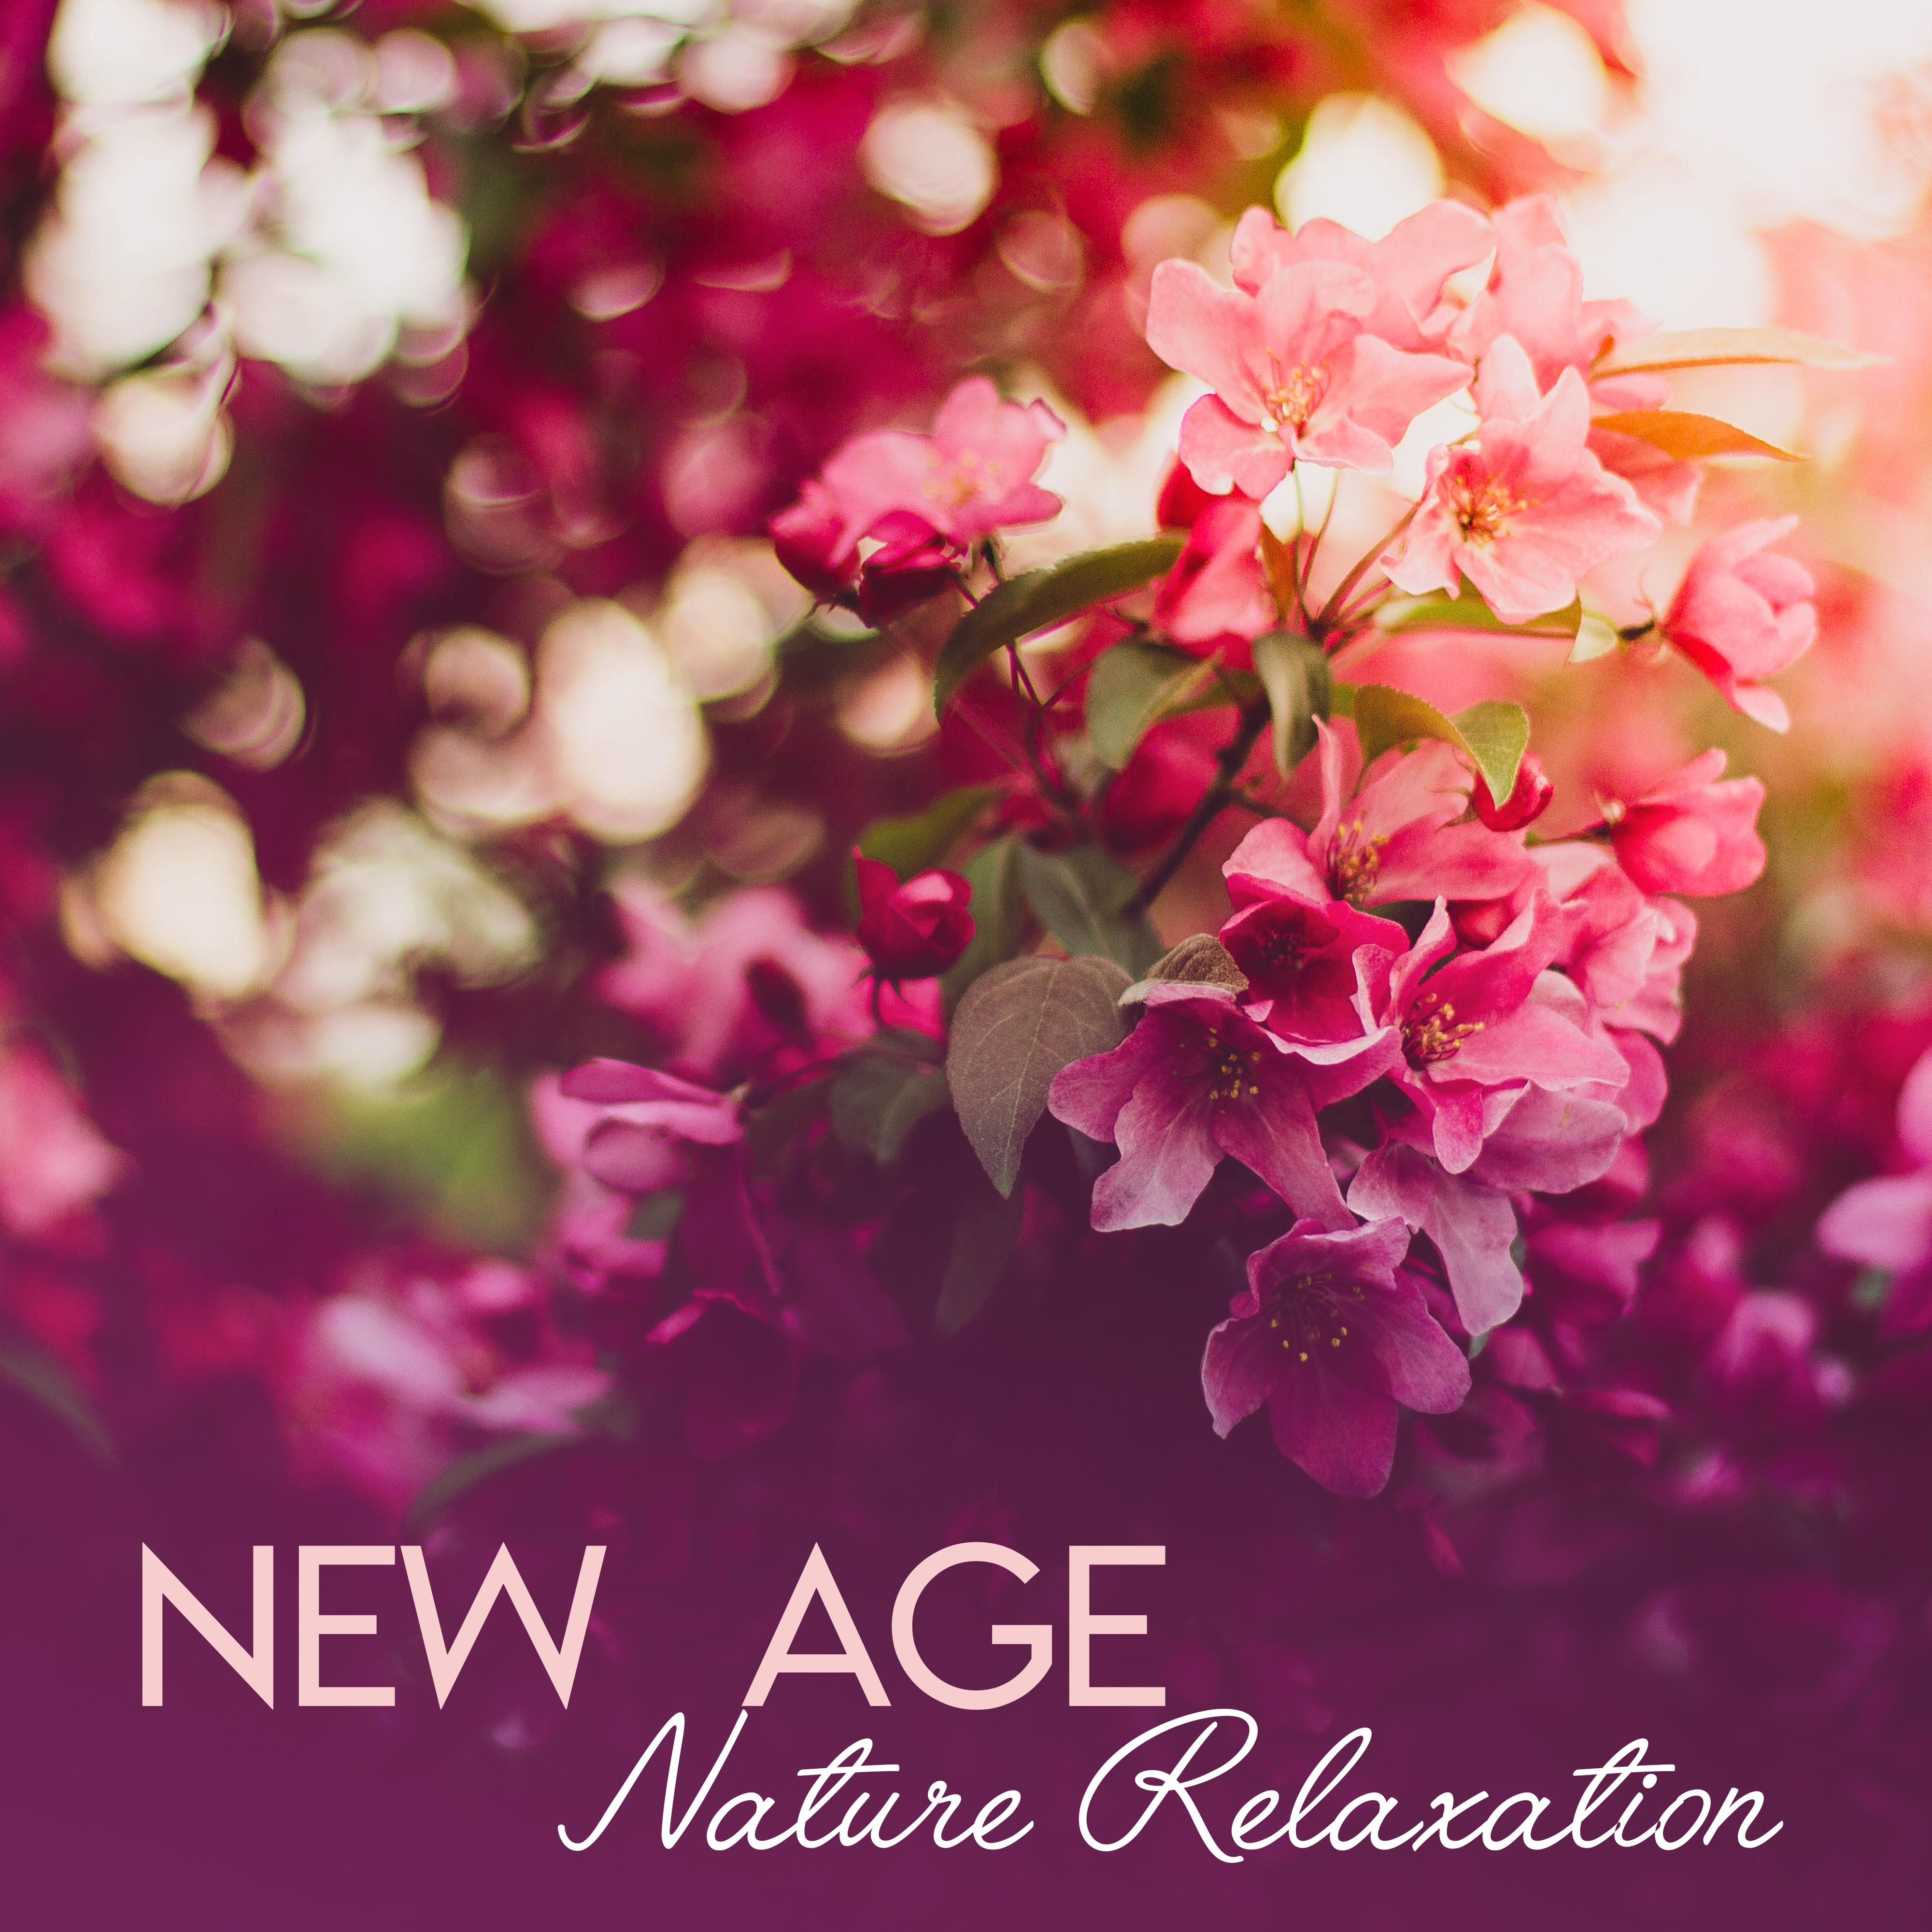 New Age Nature Relaxation